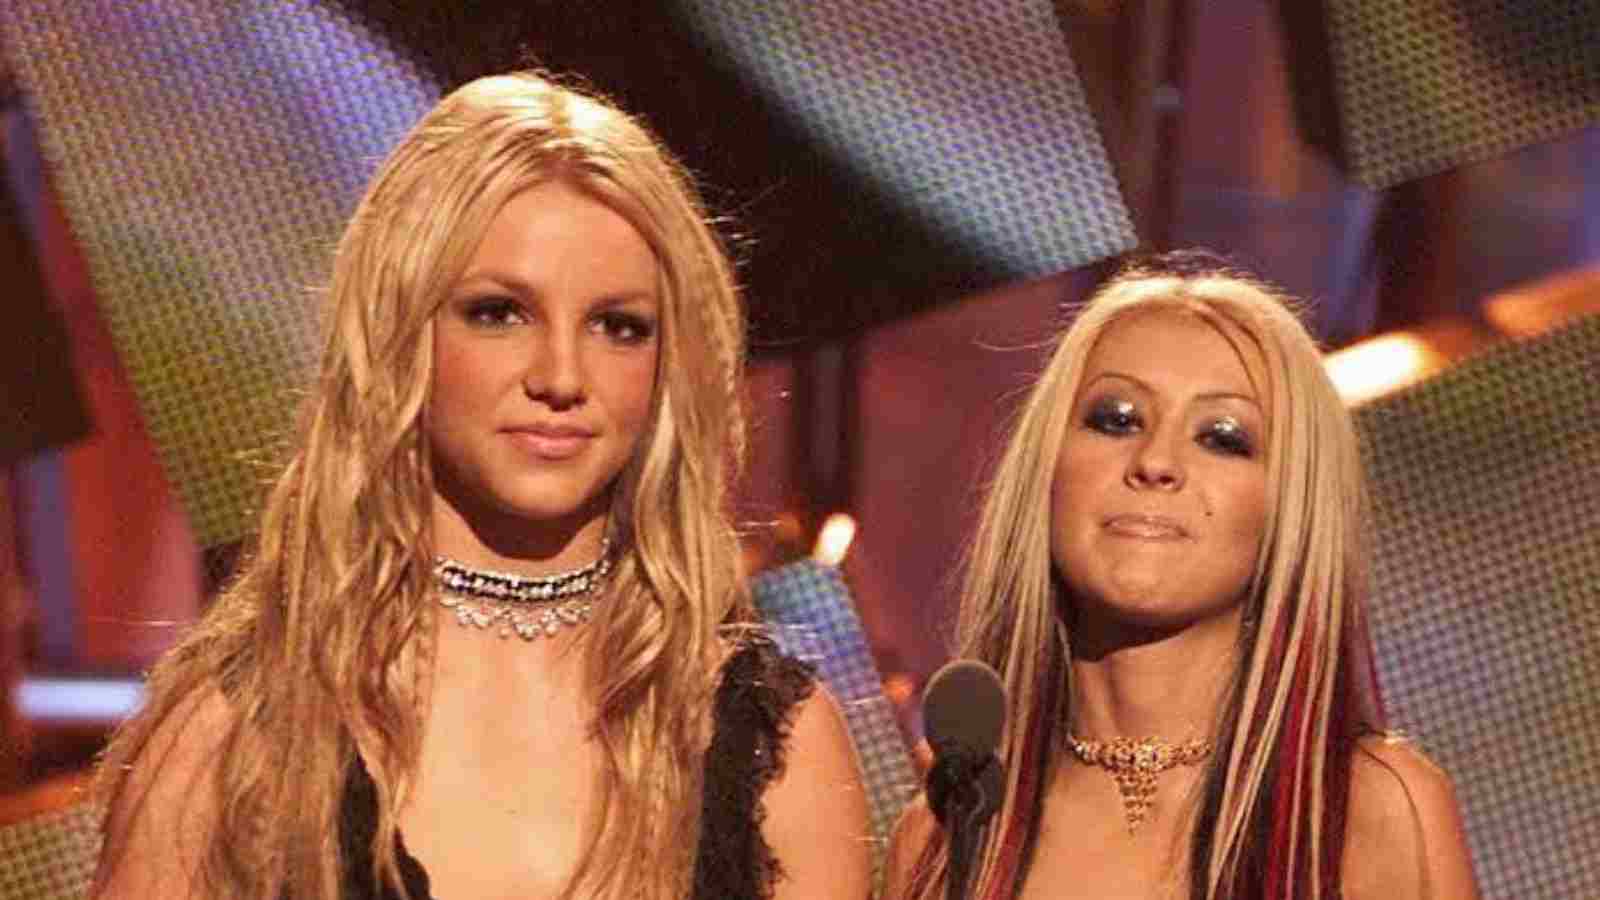 Britney Spears and Christina Aguilera were seemingly in a love triangle celebrity feud